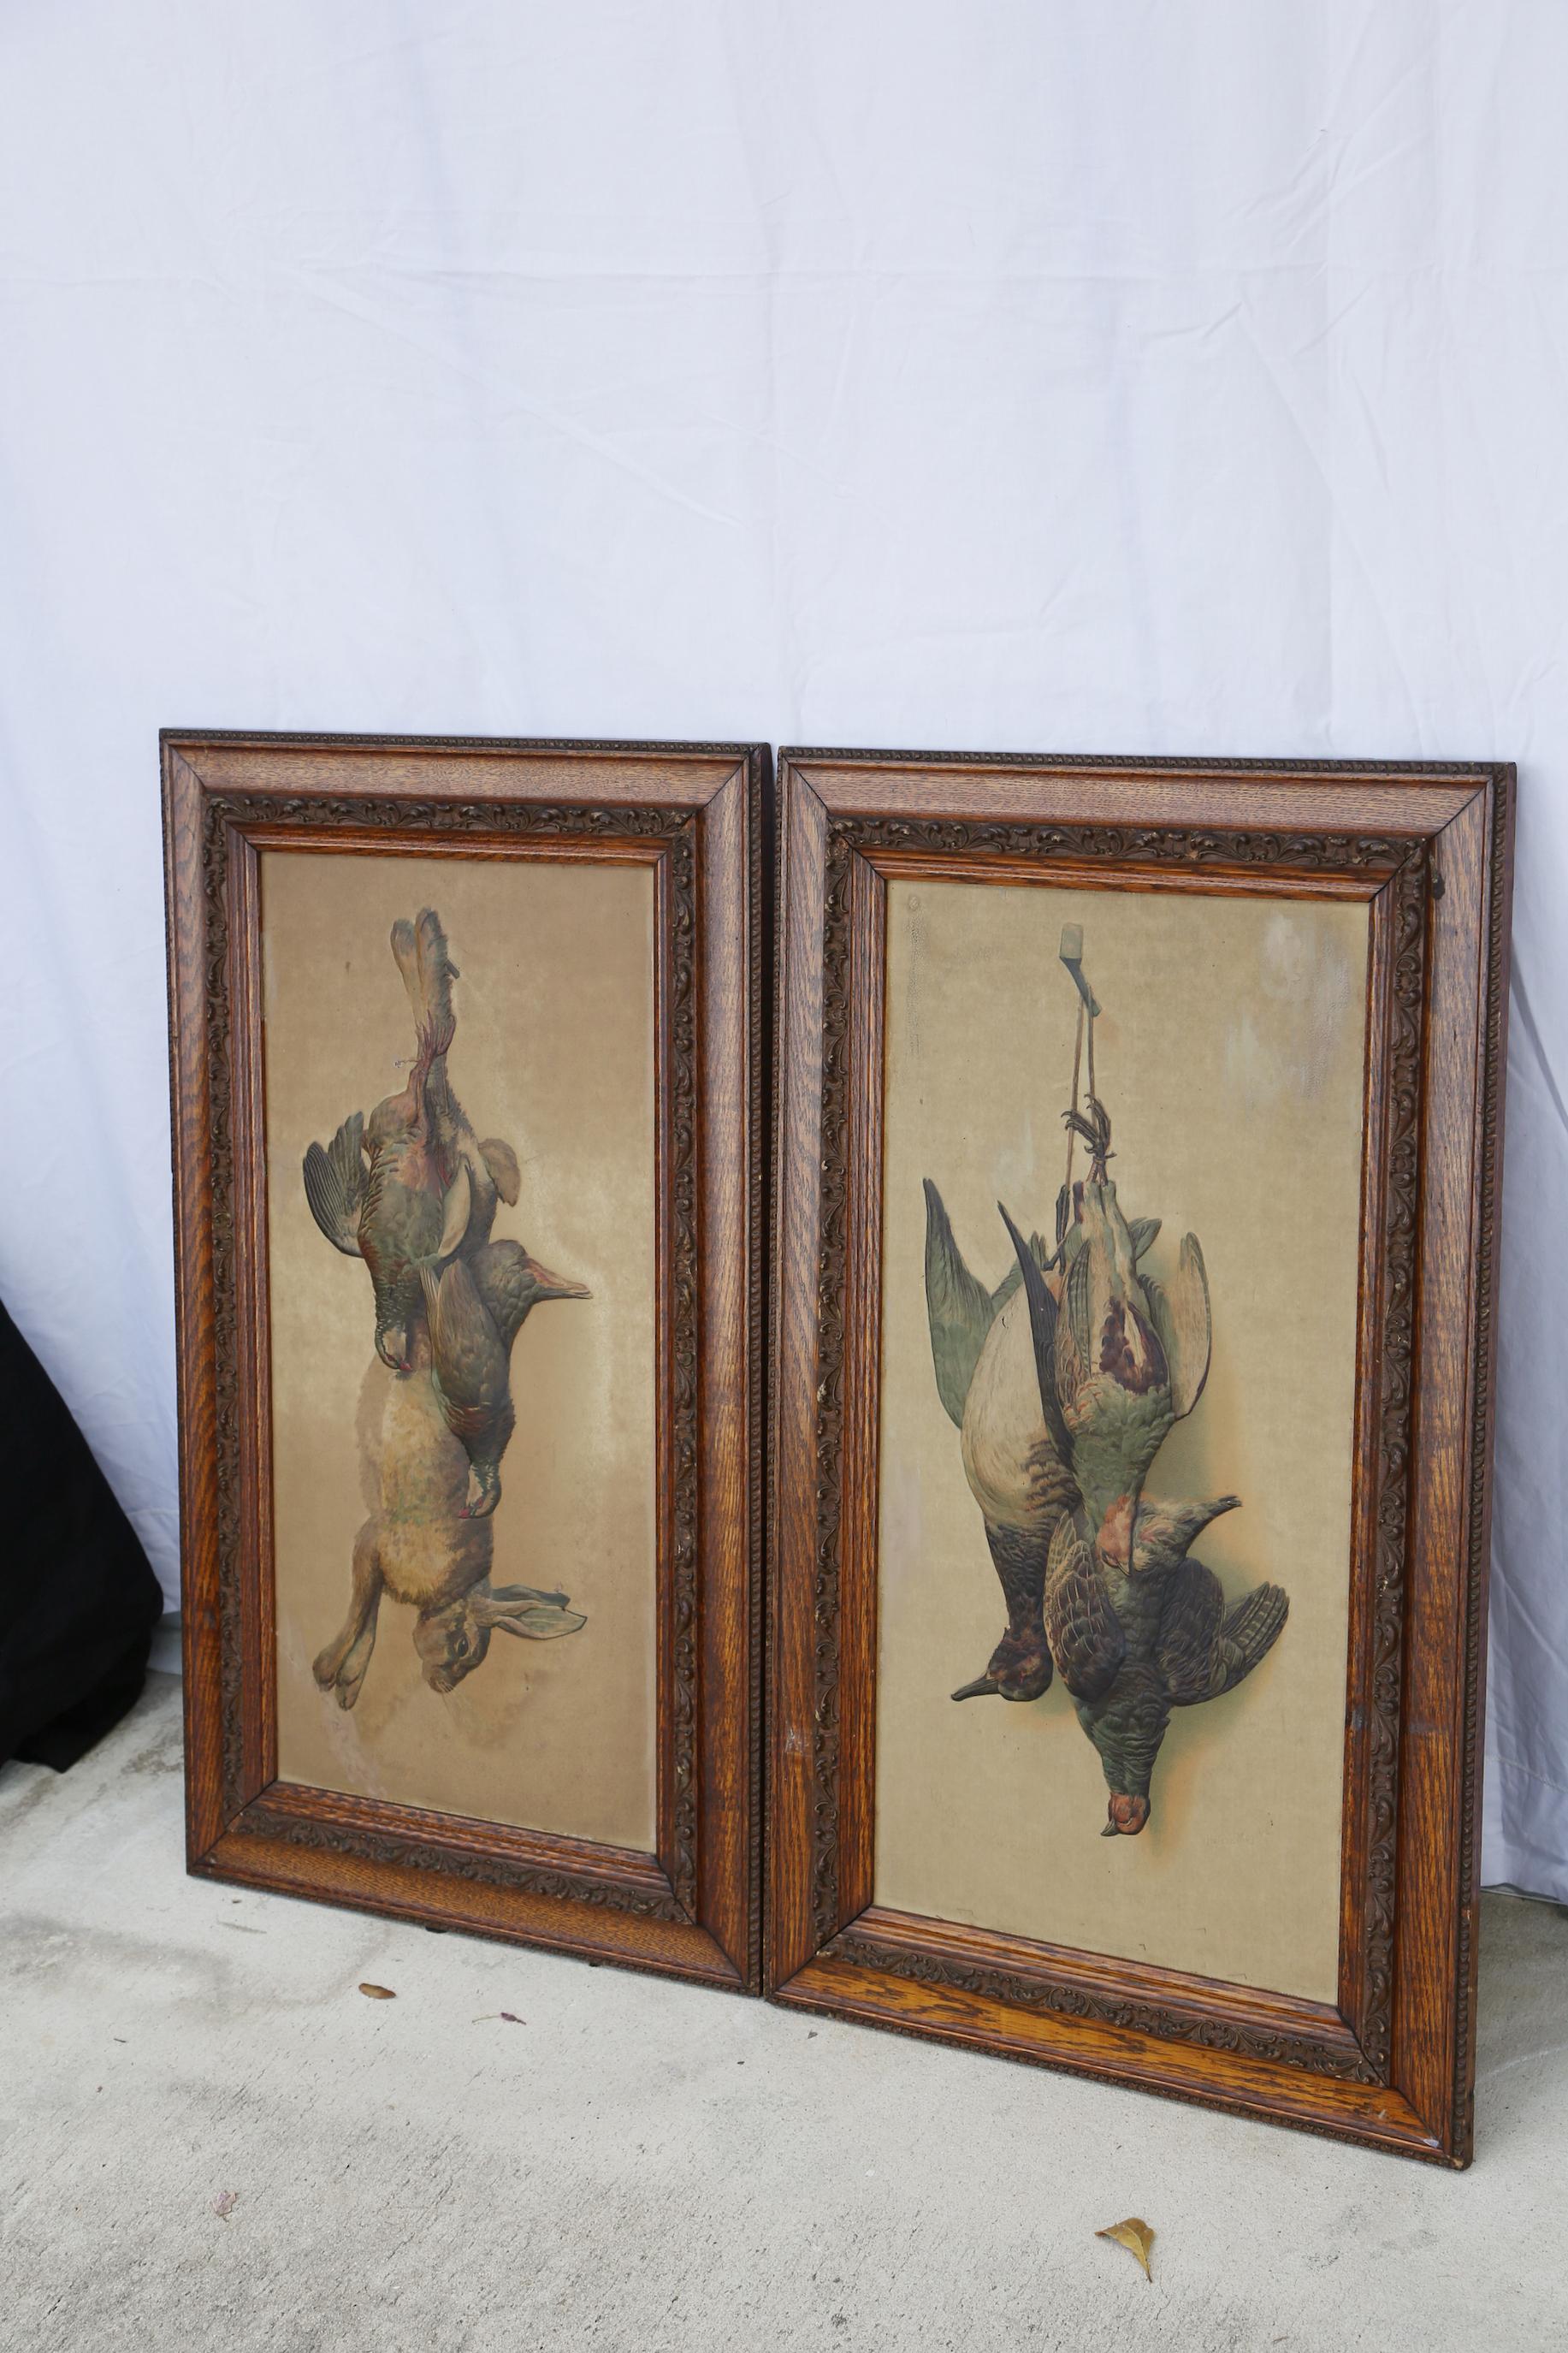 Antique embossed prints of fowl and rabbit giving them a three dimensional feeling.